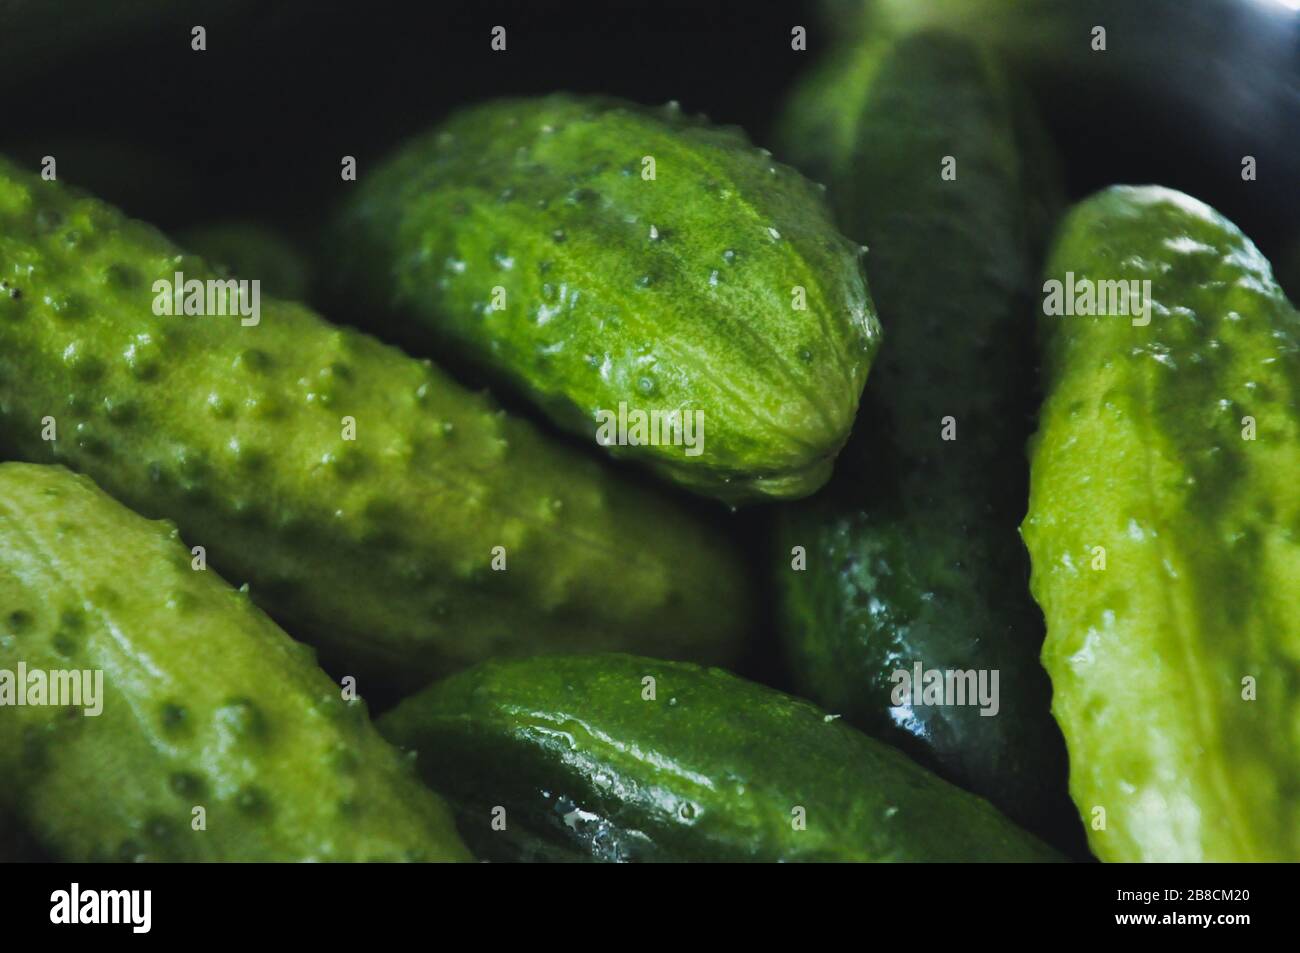 A bunch of green tasty cucumbers with pimples Stock Photo